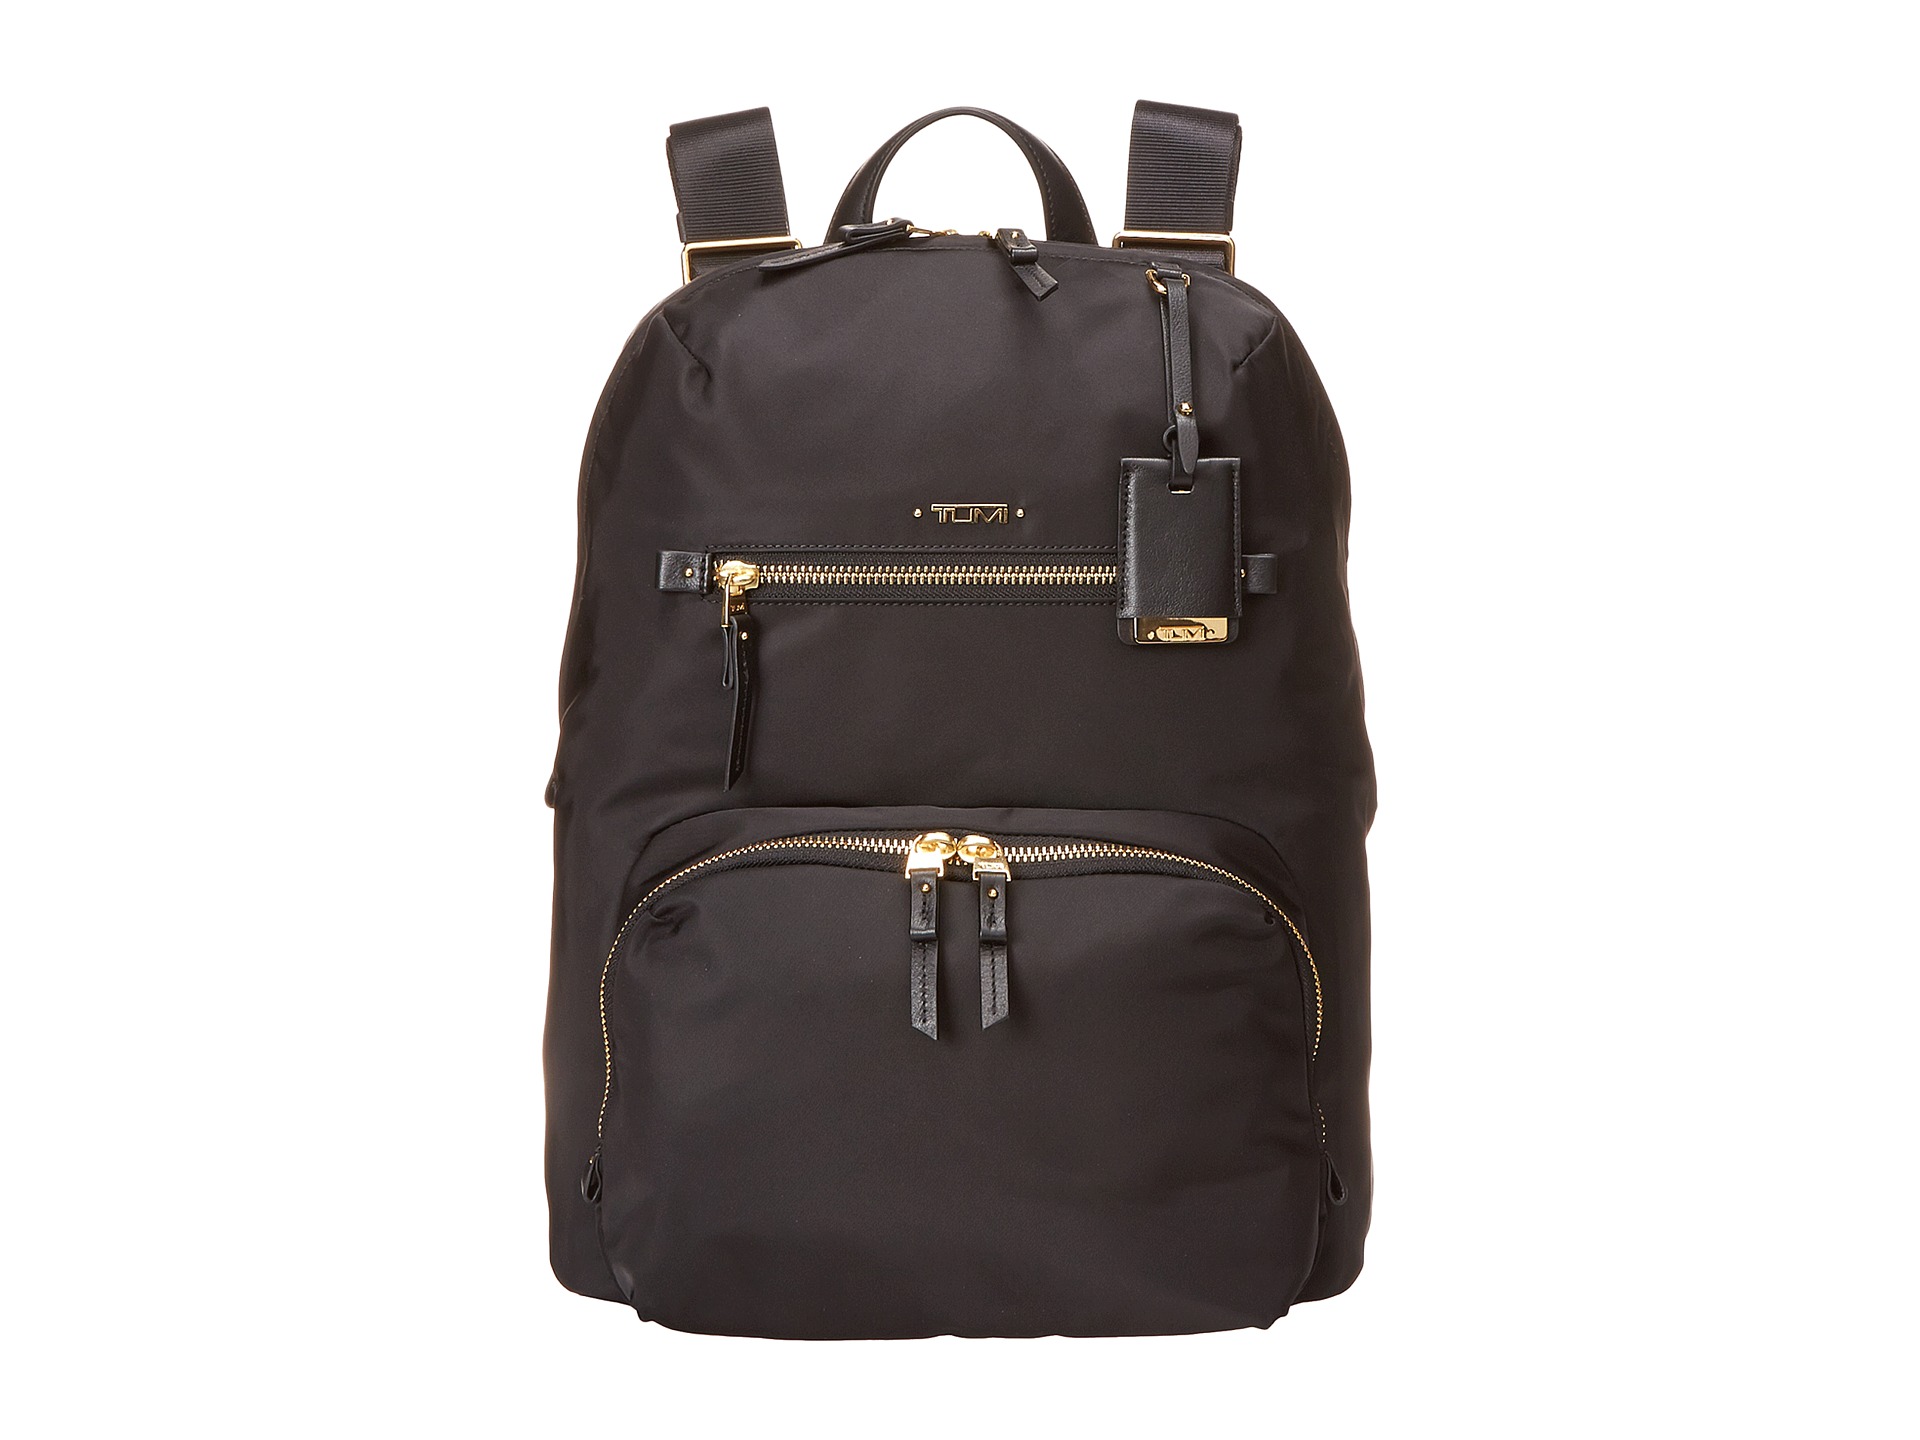 Tumi Voyageur Halle Backpack at Zappos.com